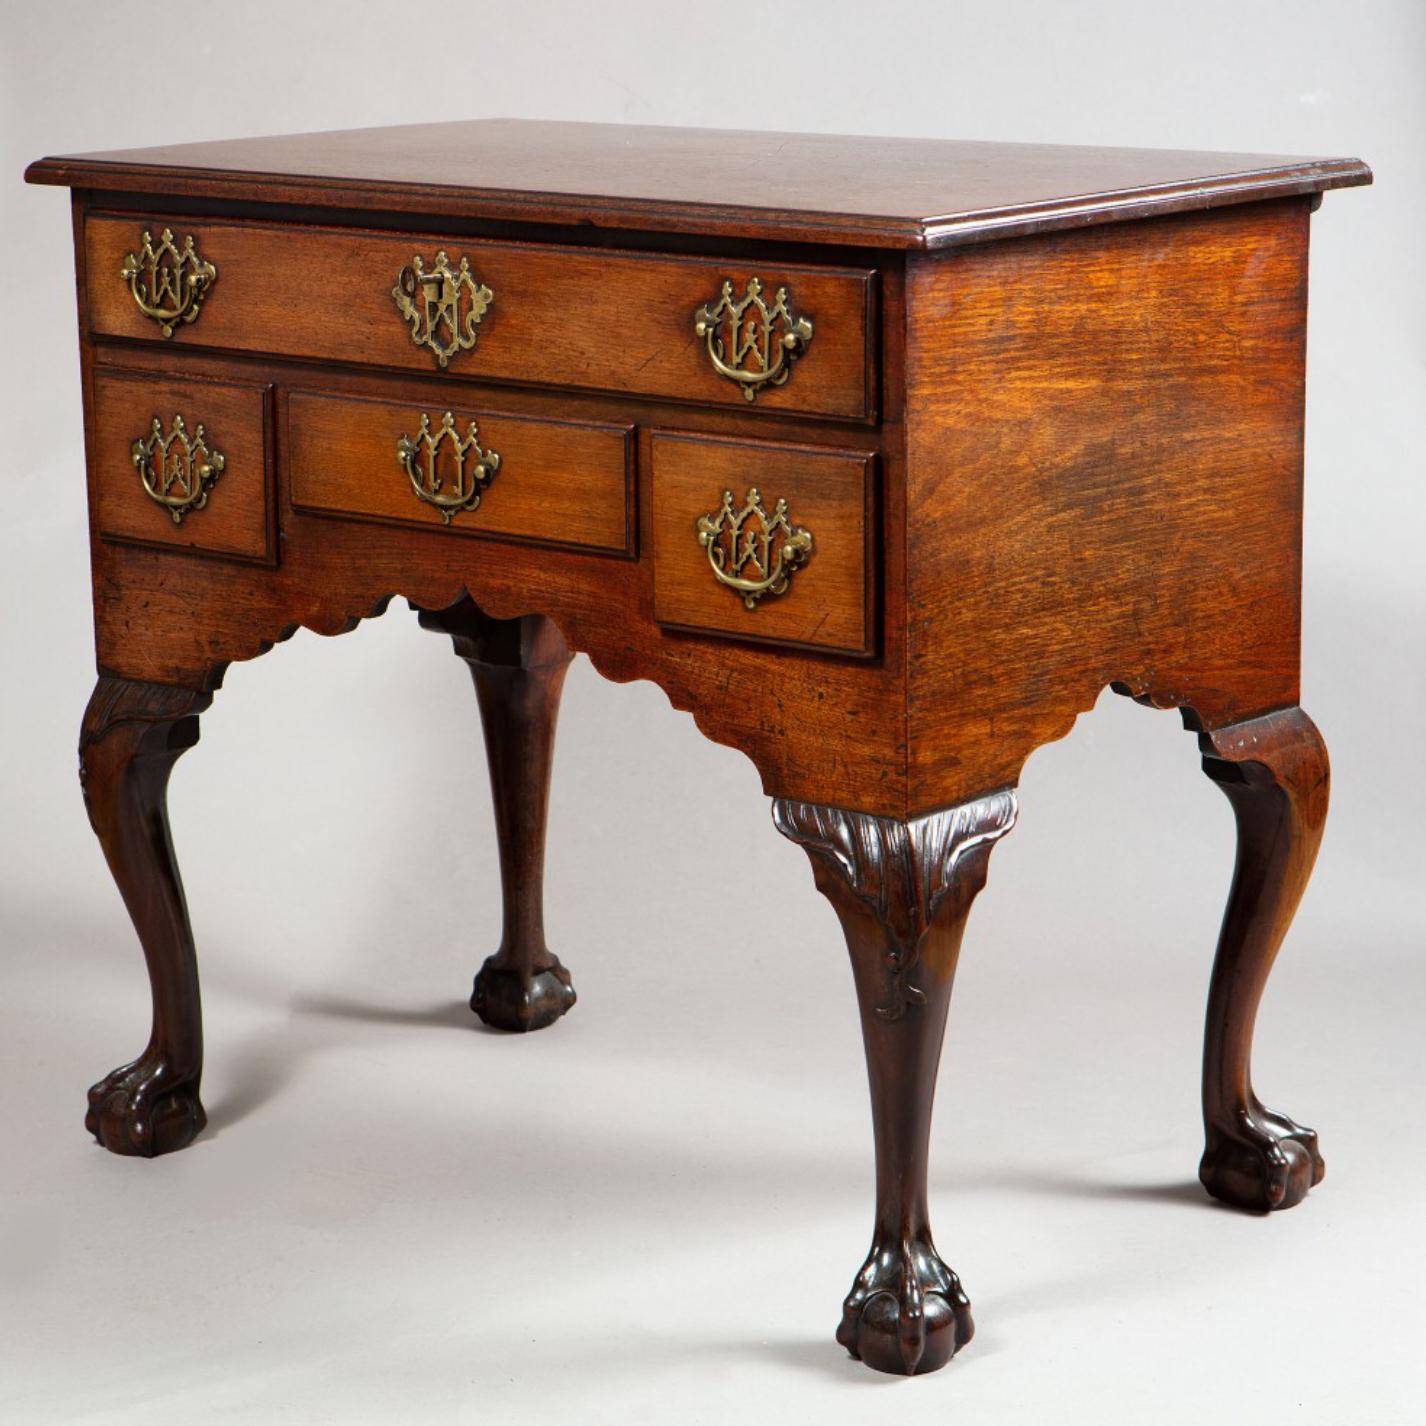 A distinctive and unusual early 18th century George I oak lowboy, the thumb moulded top above one long and three short drawers with pierced brass handles of Gothic design, the ornamental apron with ogee cut detail, the whole raised on ball and claw